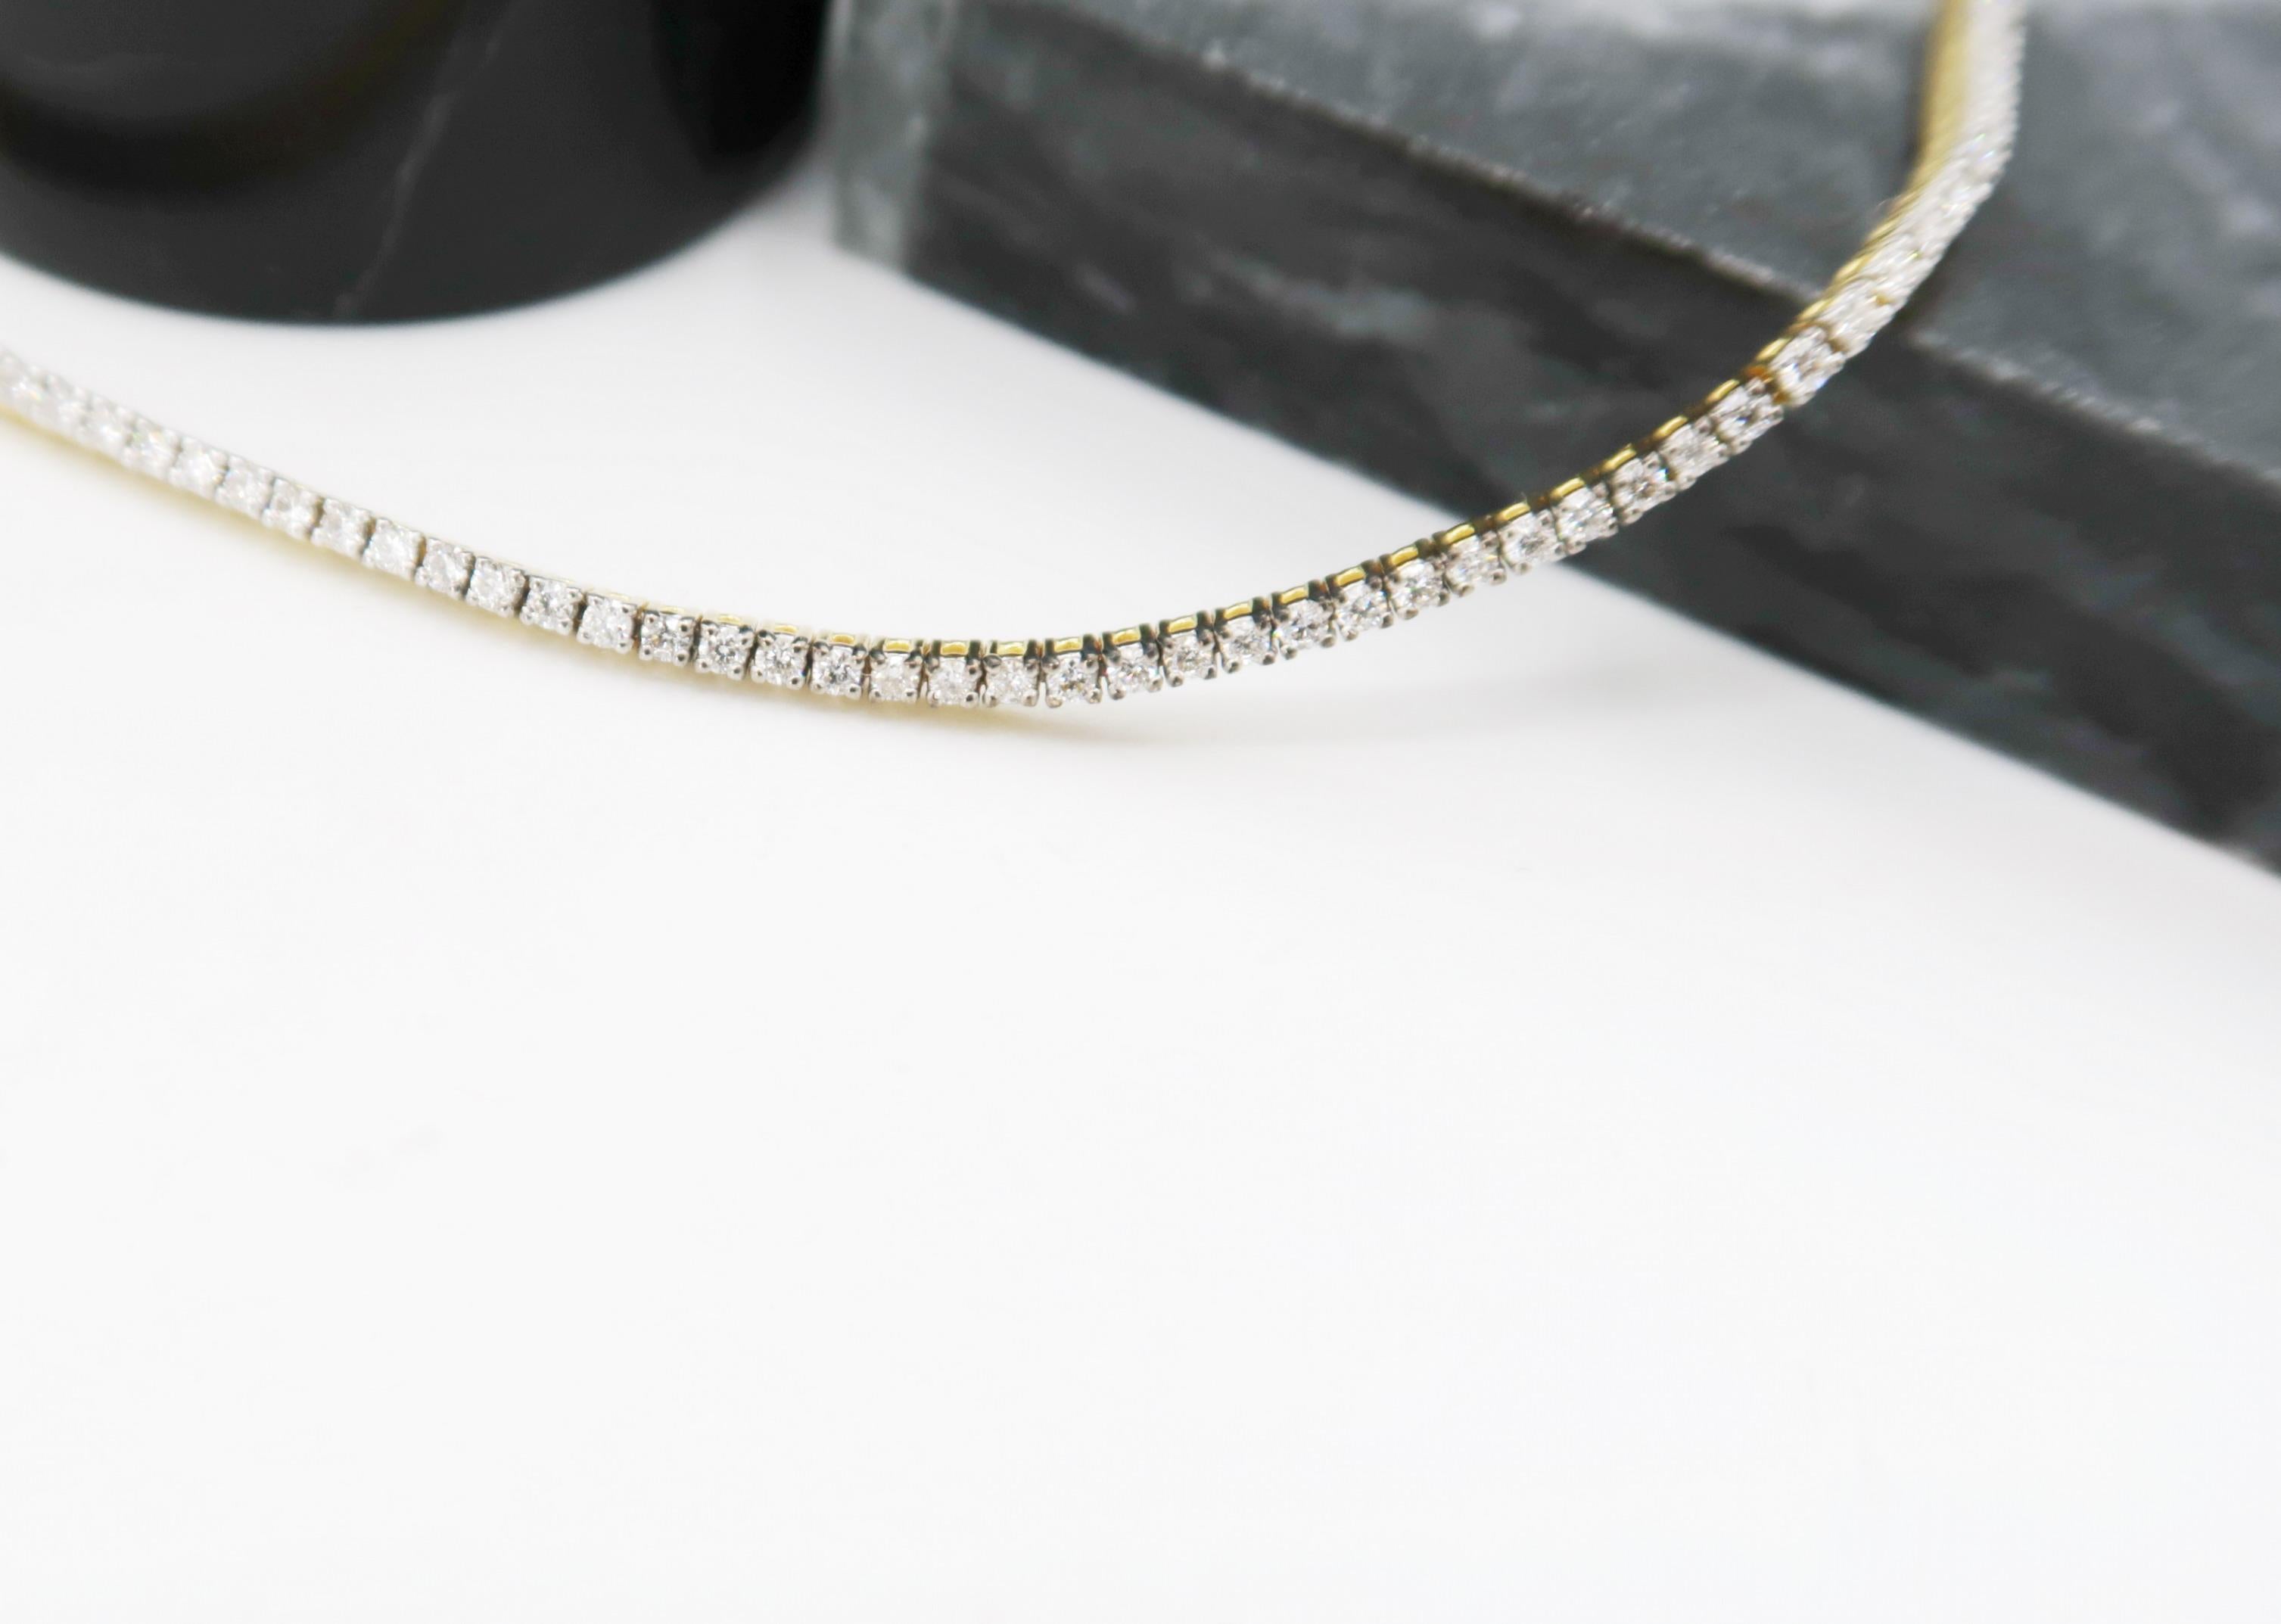 Superfine Delicate Thin Diamond Tennis Bracelet in 18 Karat Yellow Gold

Delicacy that can be worn on its own or stacked with a watch and/or other bracelets.
Also available in 18K White Gold (LU820311544062)

Gold: 18K Yellow Gold 4.60 g
Diamond: